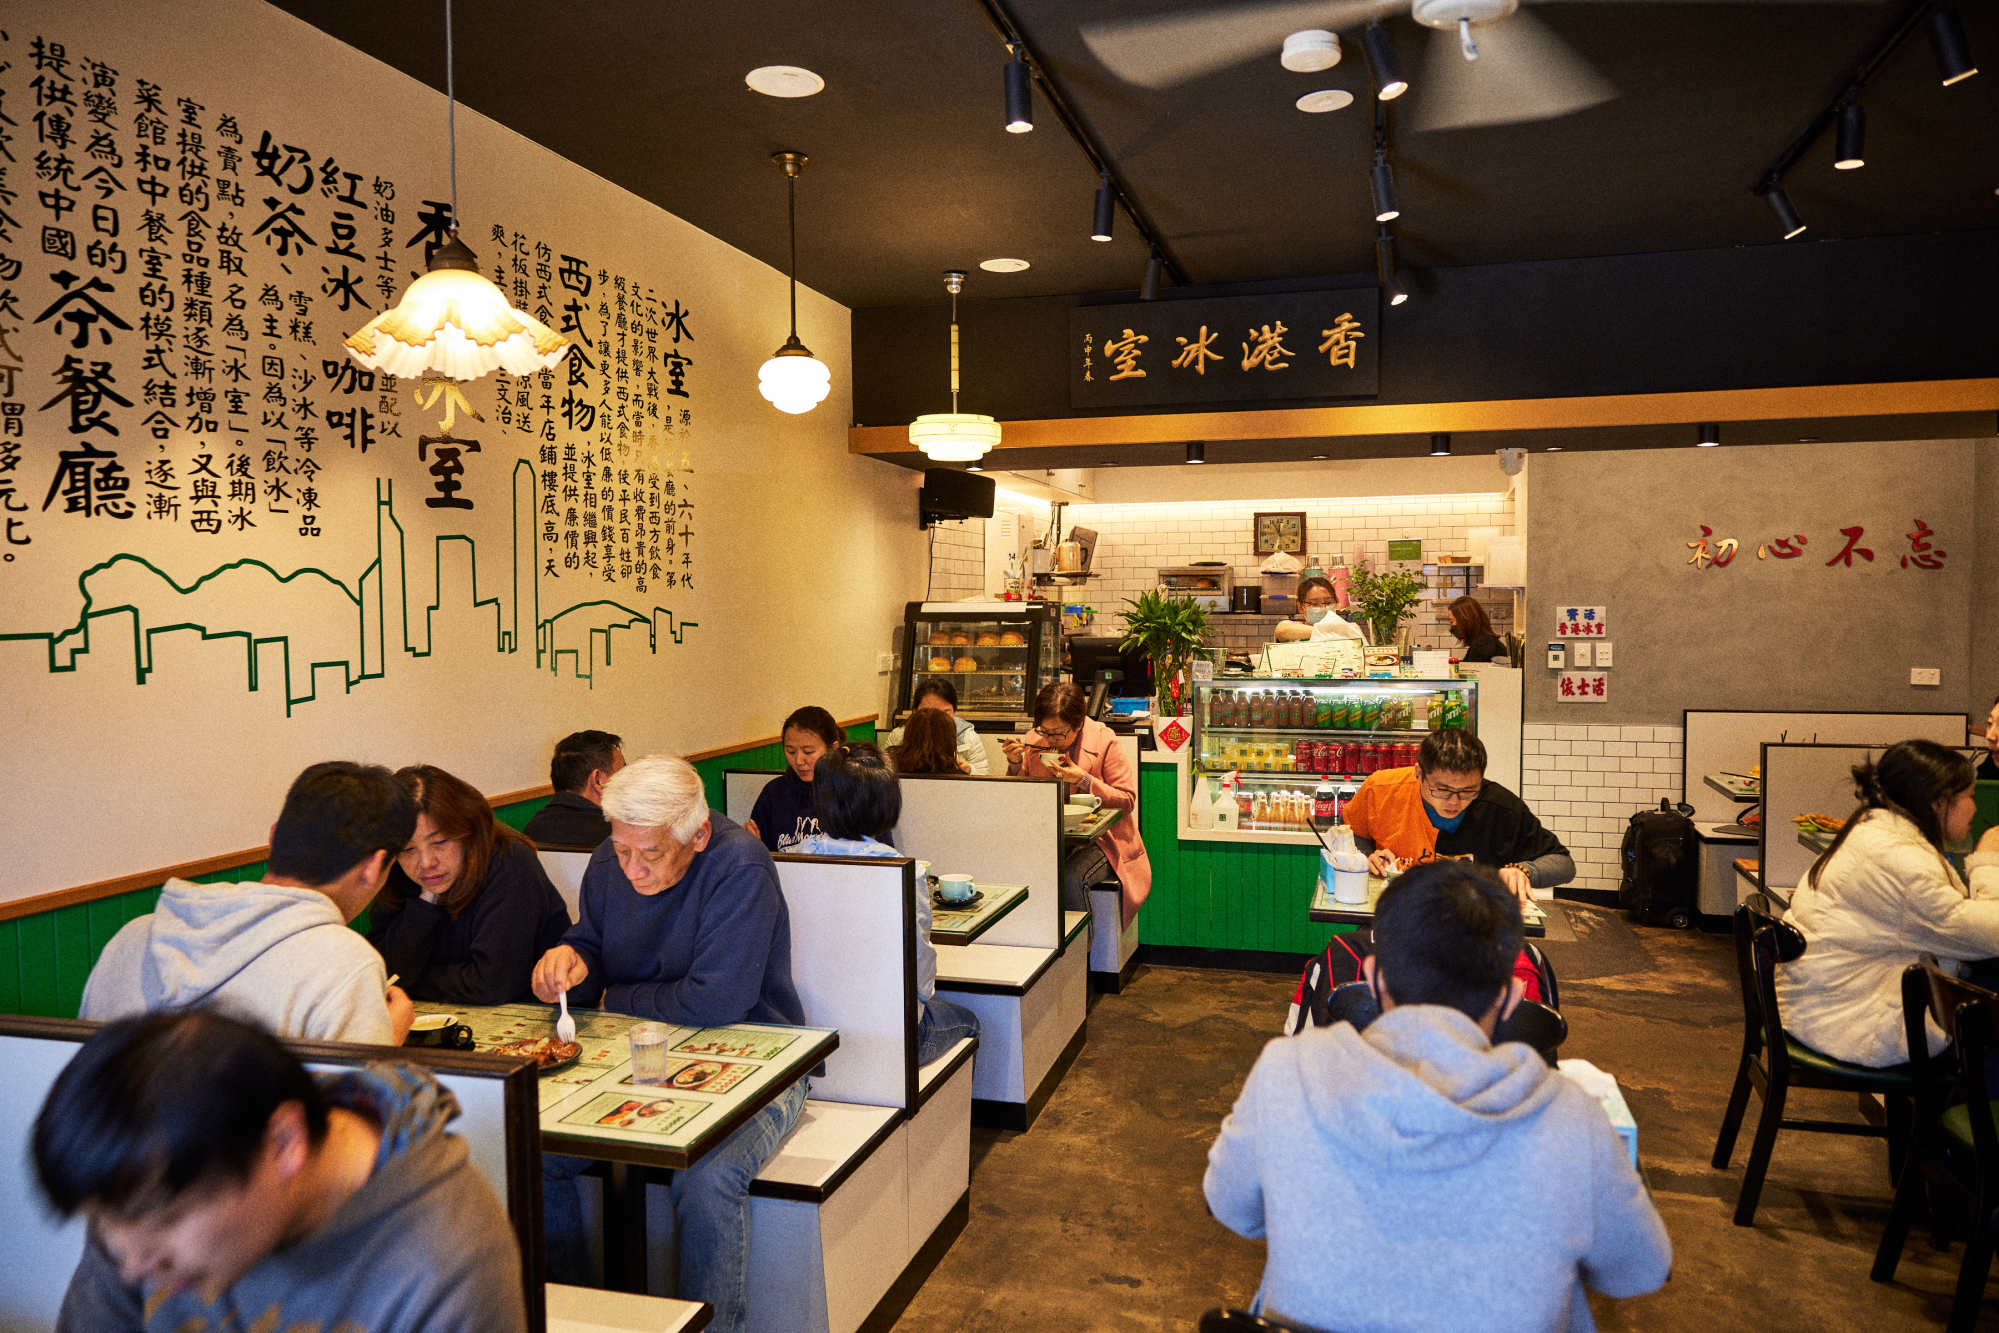 A New York subway station is the newest Korean food destination